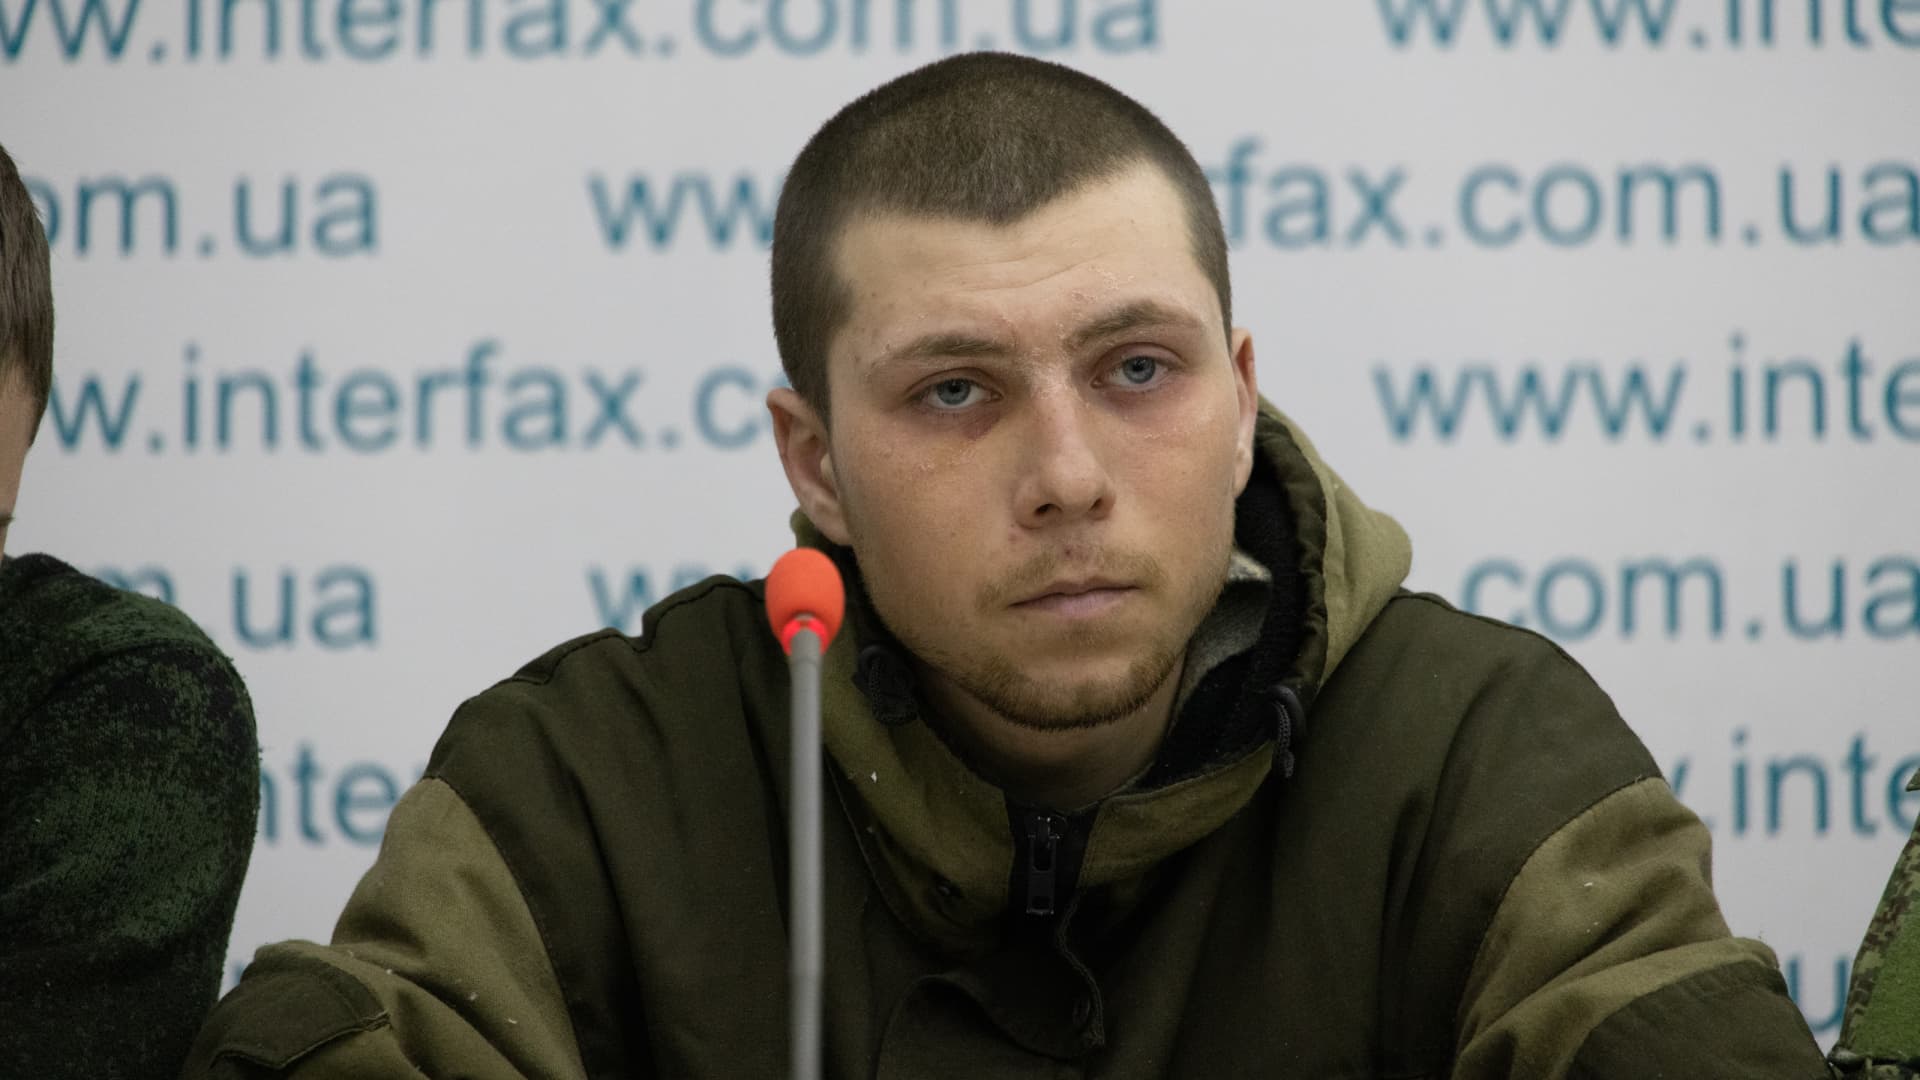 Eleven Russian soldiers captured by Ukrainian forces make a press statement on March 5, 2022 in Kyiv, Ukraine.